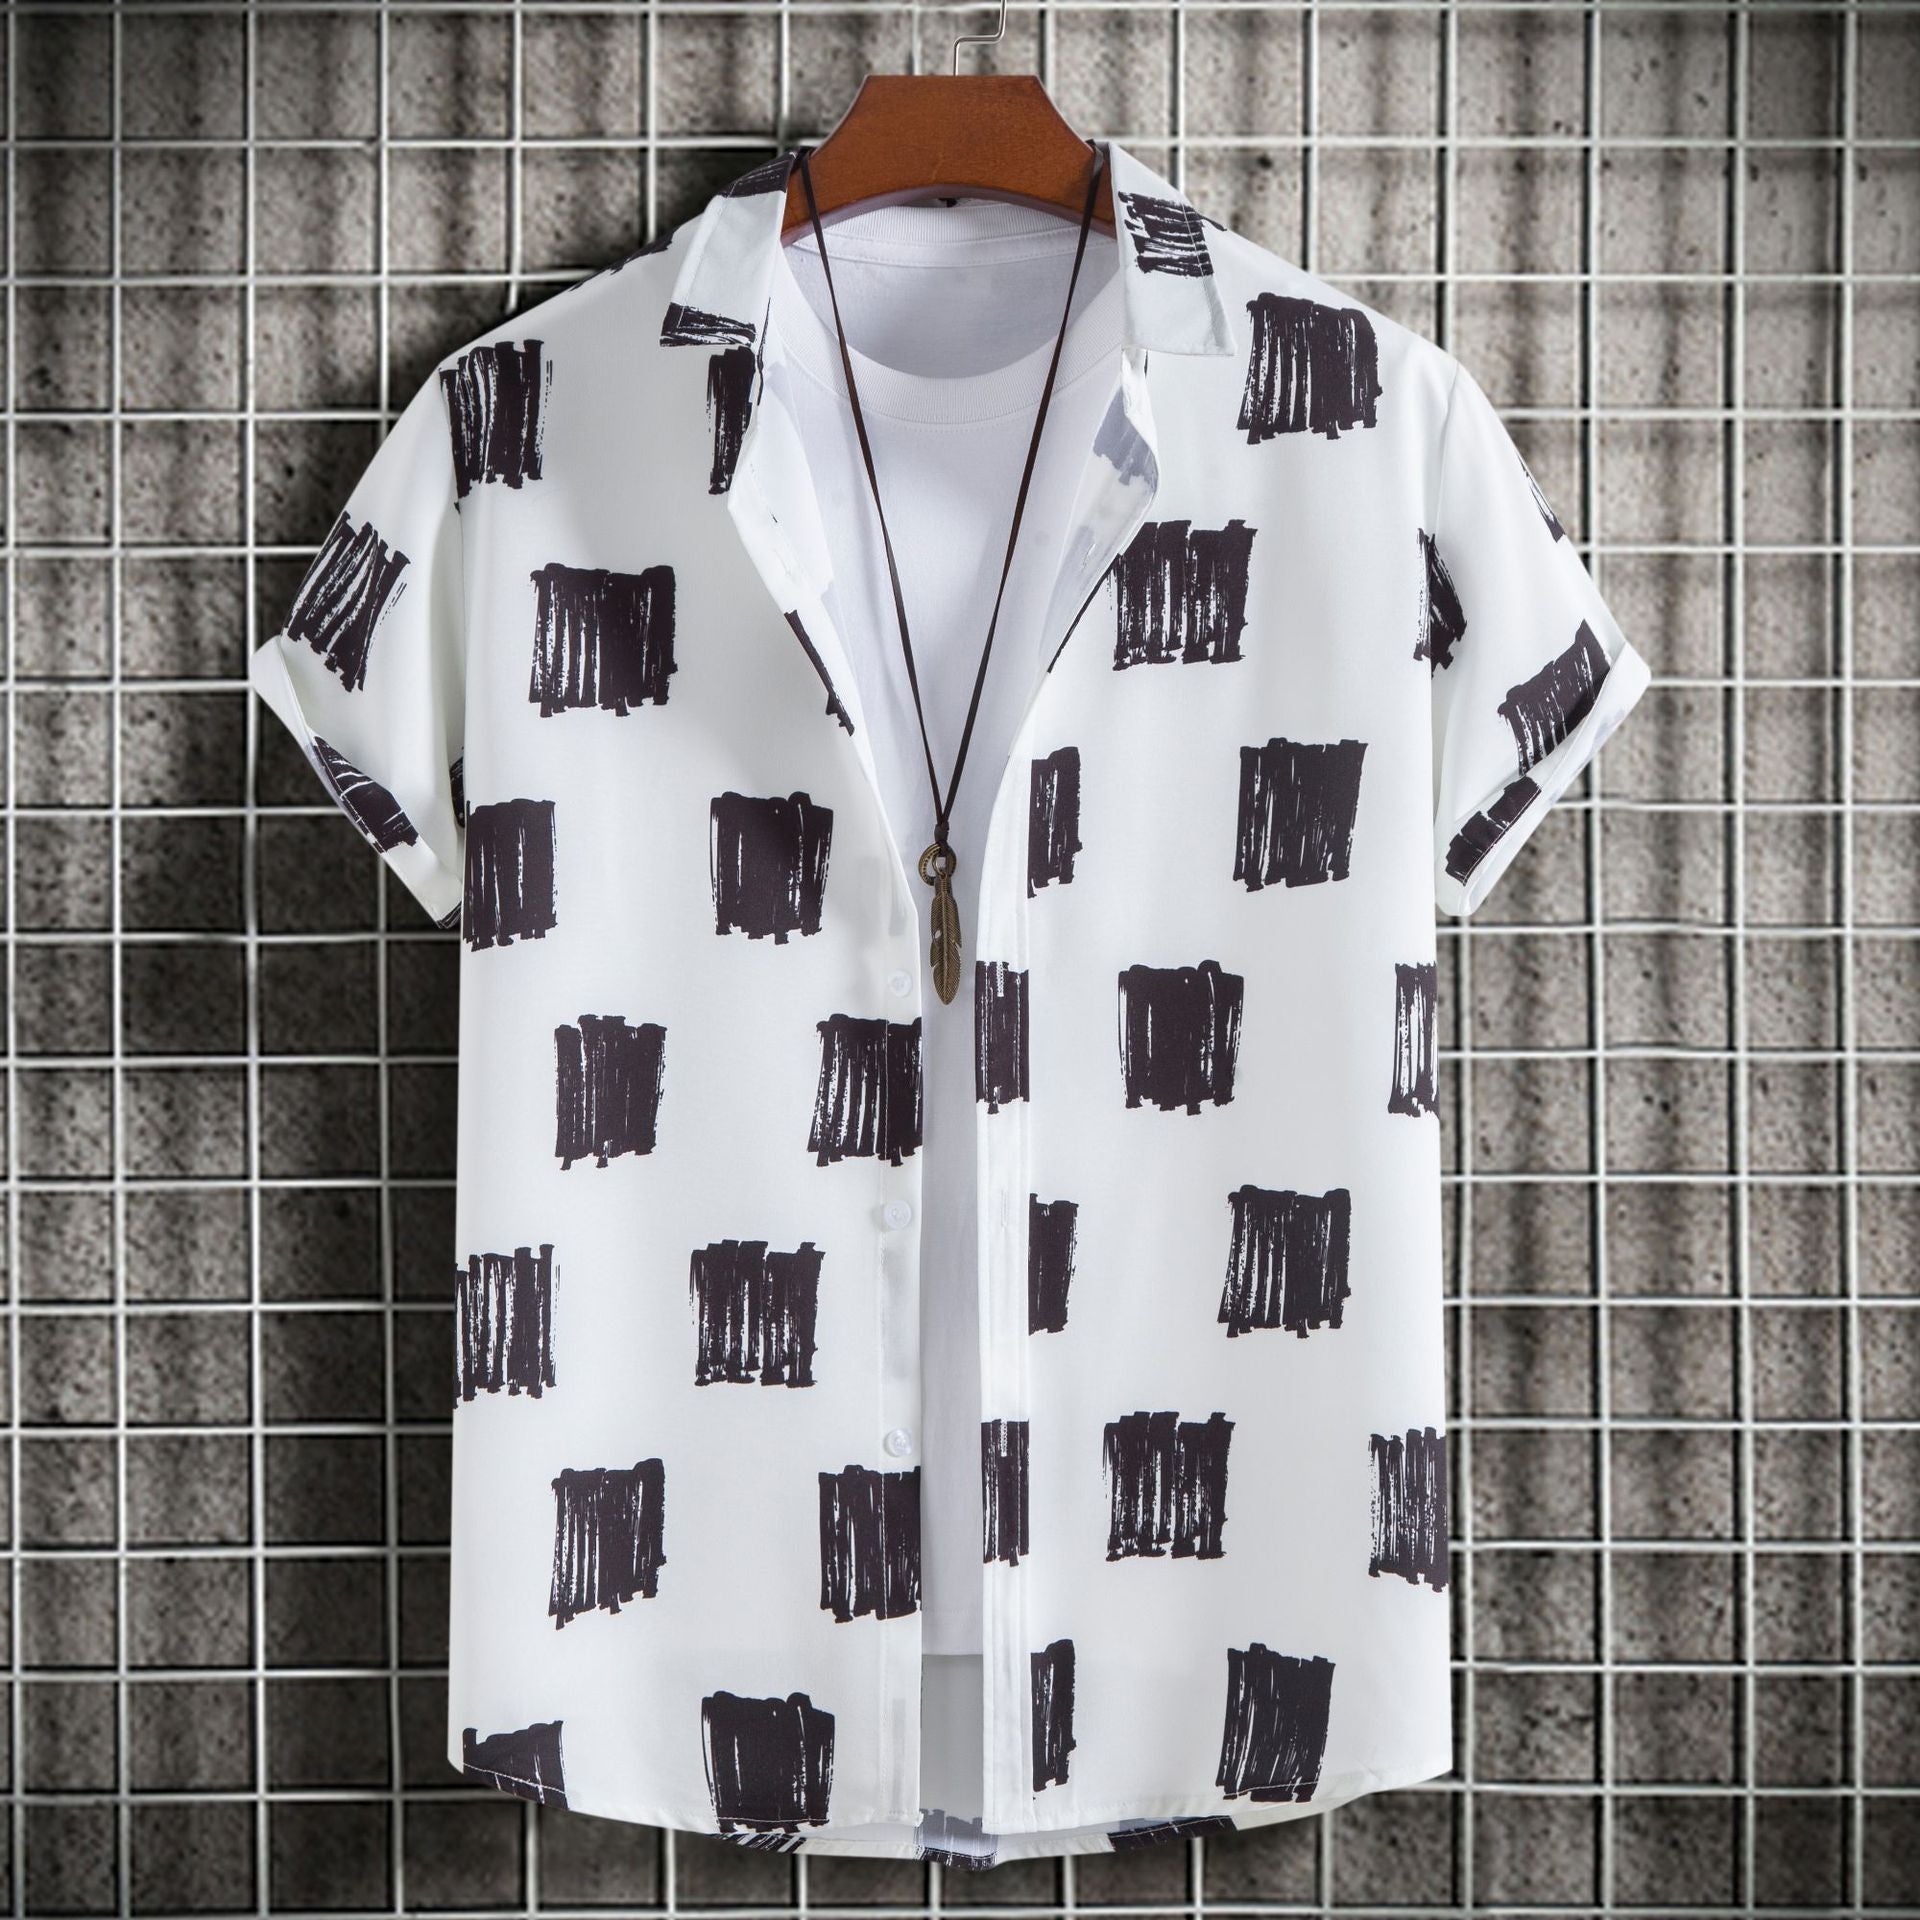 C228 - Men's Fashion Slim-fit Printed Short Sleeve Button Up Shirts - mens button up shirt at TFC&H Co.